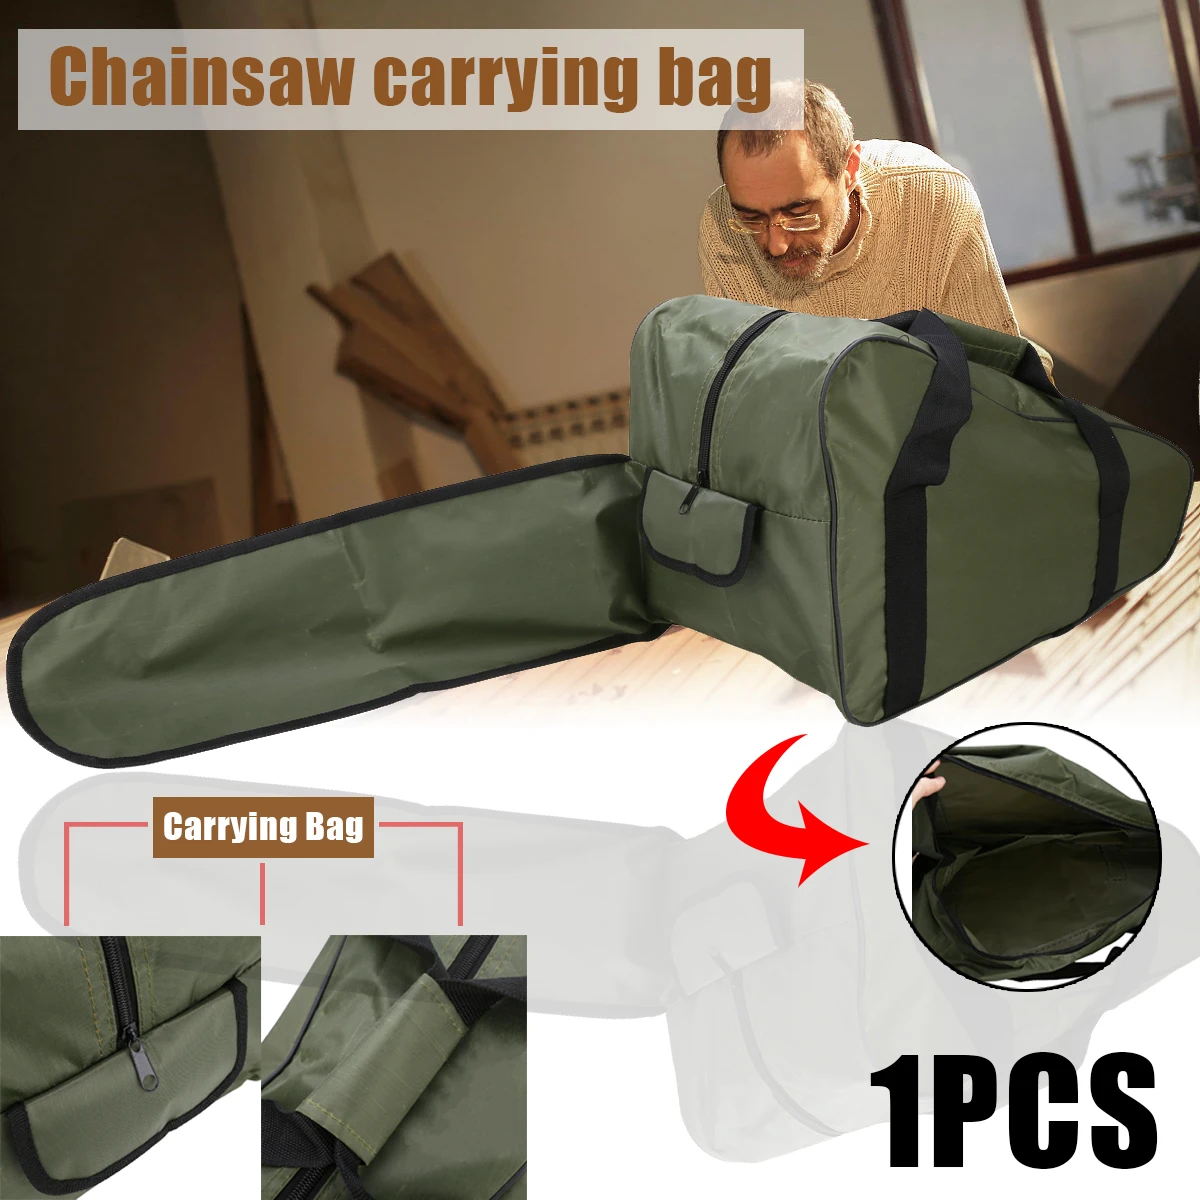 

High Quality 20'' Chainsaw Carrying Bag Box Protective Holdall Holder Case Green Chain Saw Engine Carrying Bag Mayitr